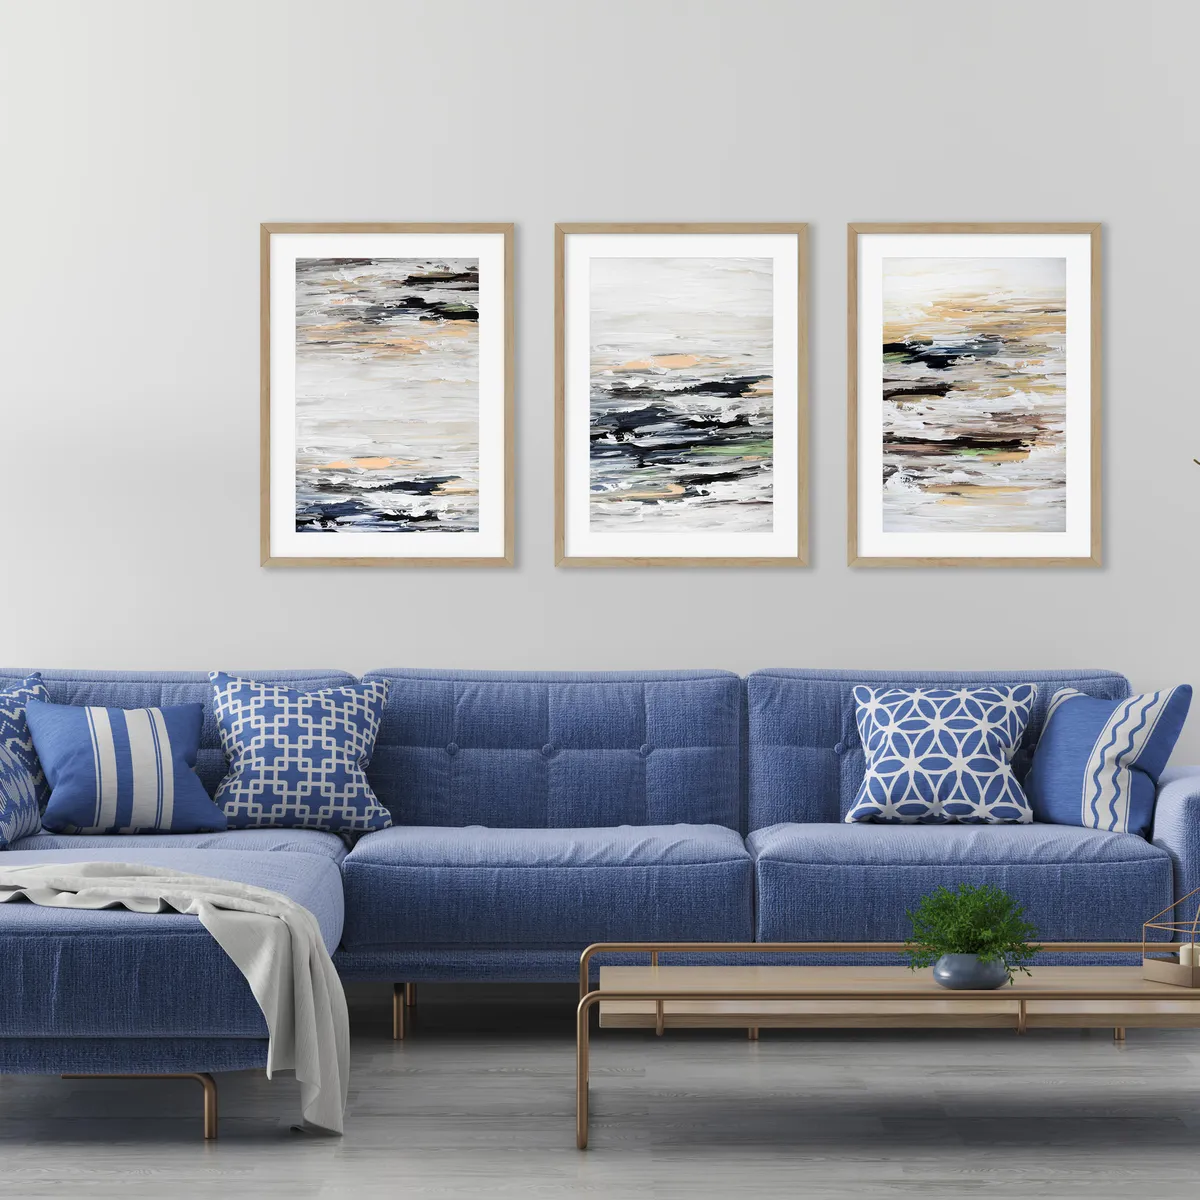 Pair cornflower blue furnishings with cool grey walls for a modern seaside vibe. Image by Abstract House. 